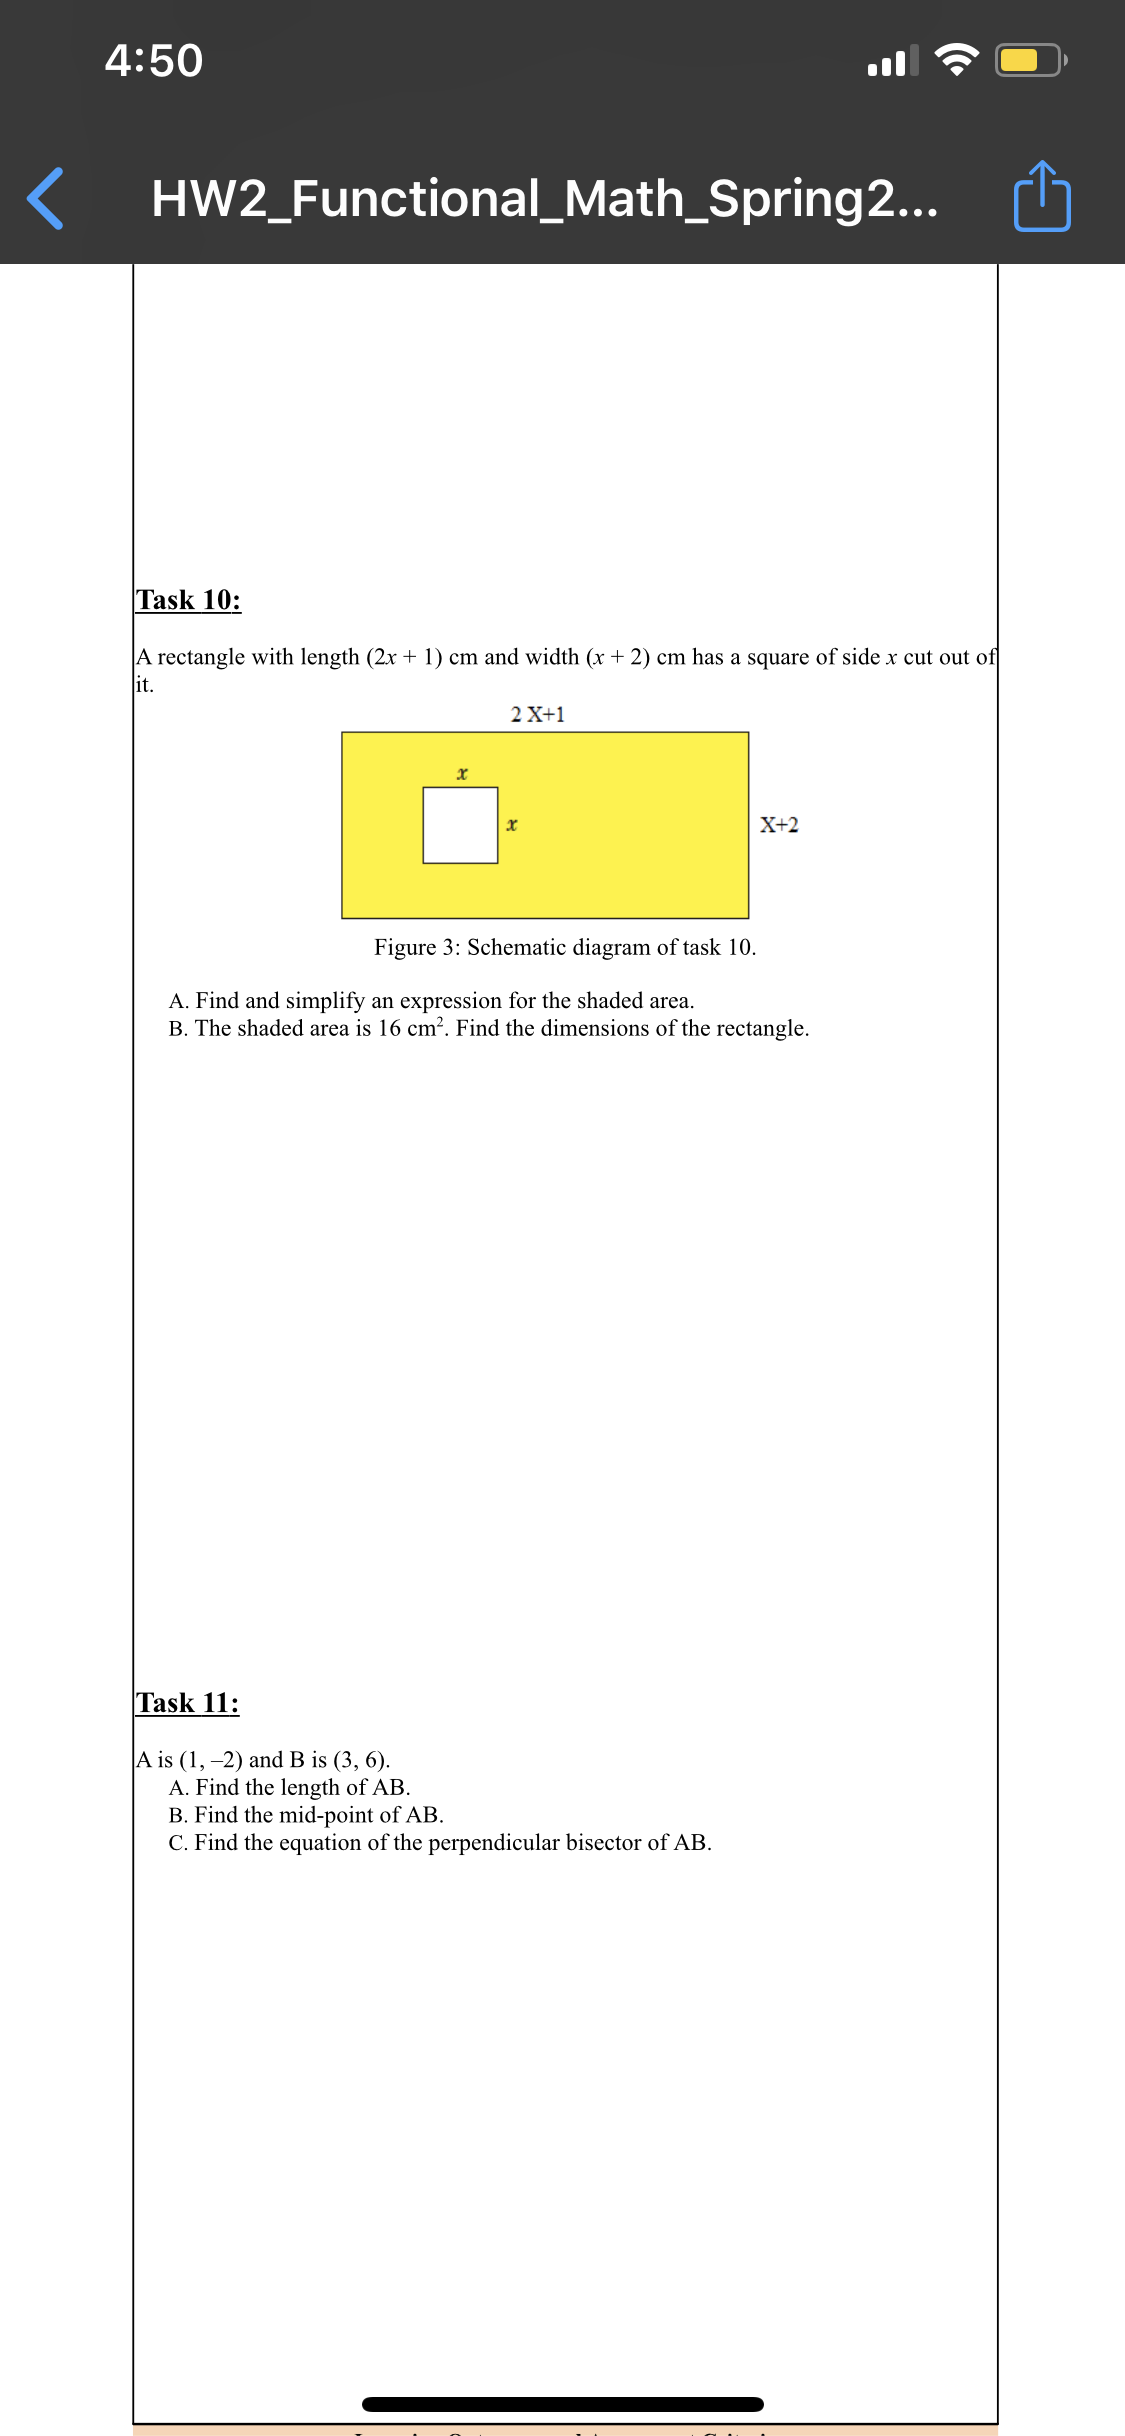 4:50
HW2_Functional_Math_Spring2...
Task 10:
A rectangle with length (2x + 1) cm and width (x + 2) cm has a square of side x cut out of
it.
2 X+1
х
X+2
Figure 3: Schematic diagram of task 10.
A. Find and simplify an expression for the shaded area.
B. The shaded area is 16 cm?. Find the dimensions of the rectangle.
Task 11:
A is (1, –2) and B is (3, 6).
A. Find the length of AB.
B. Find the mid-point of AB.
C. Find the equation of the perpendicular bisector of AB.
